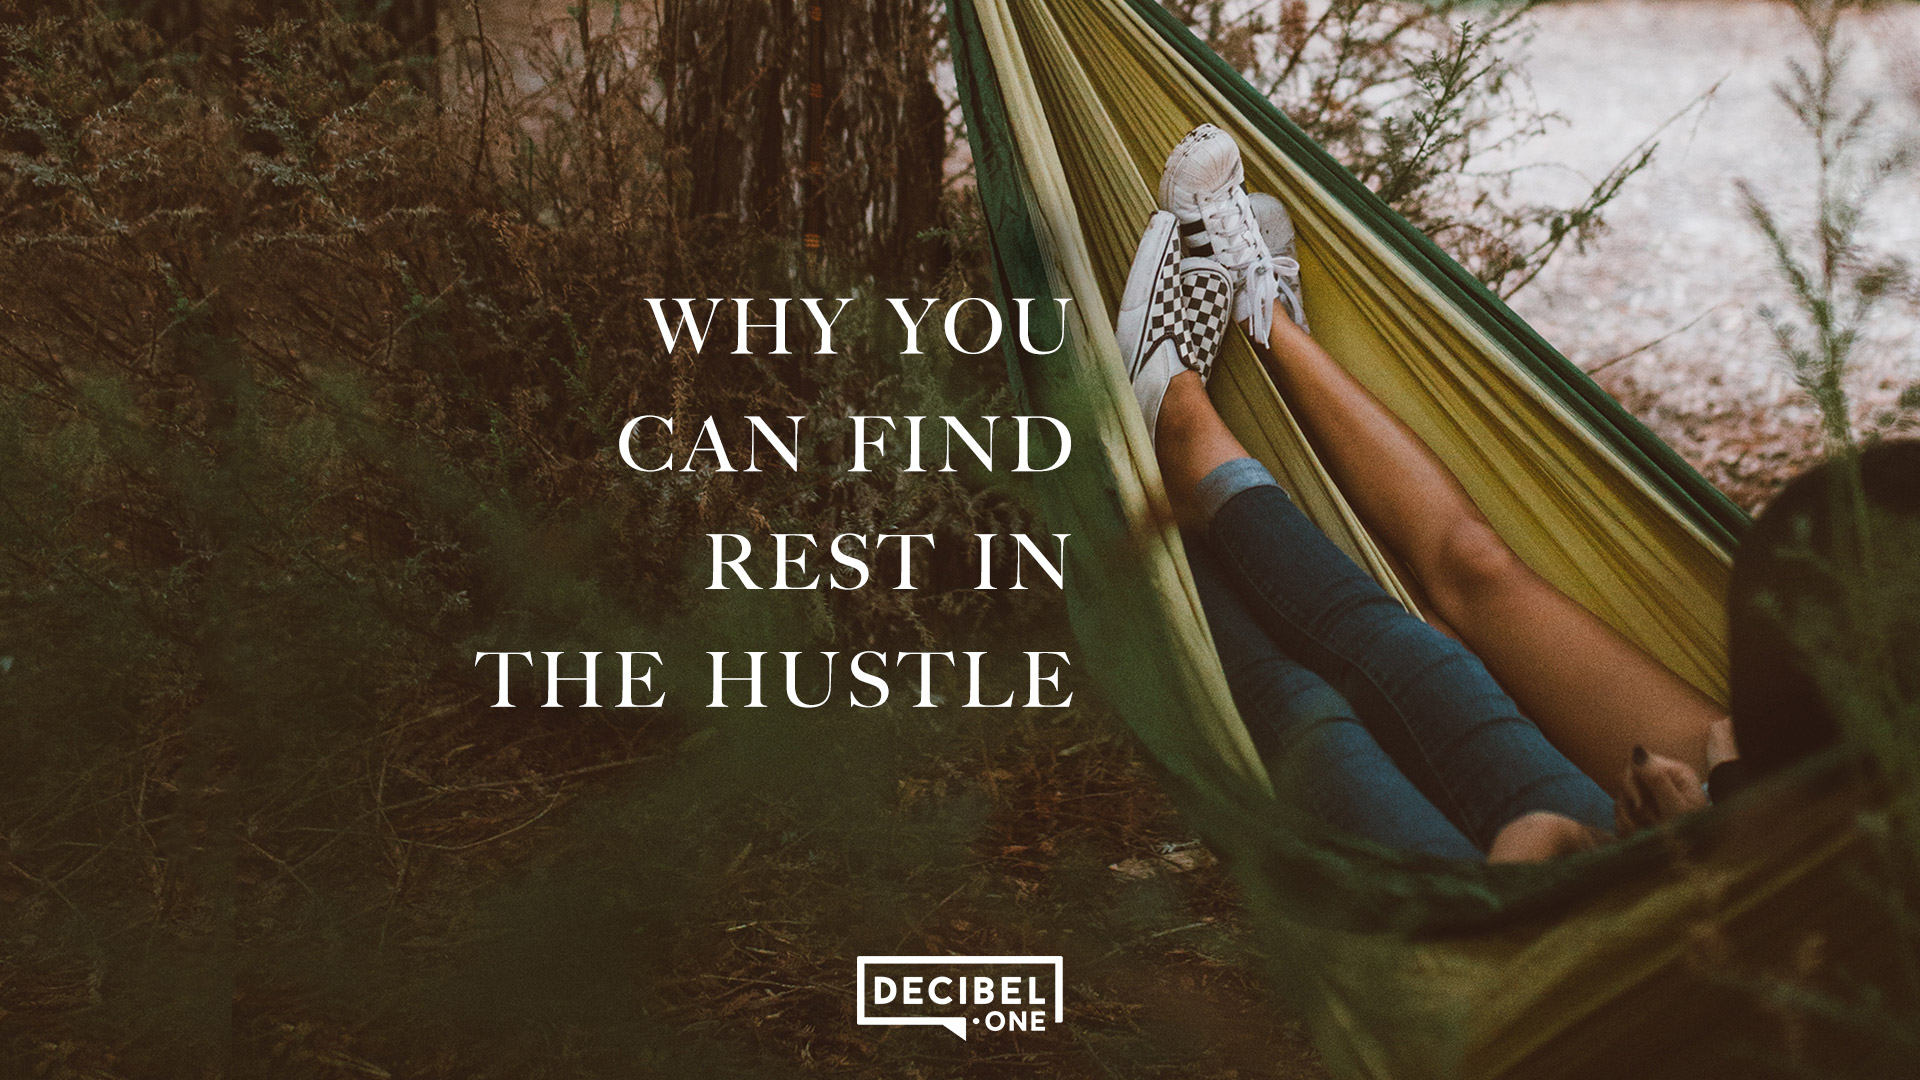 Why you can find rest in the hustle